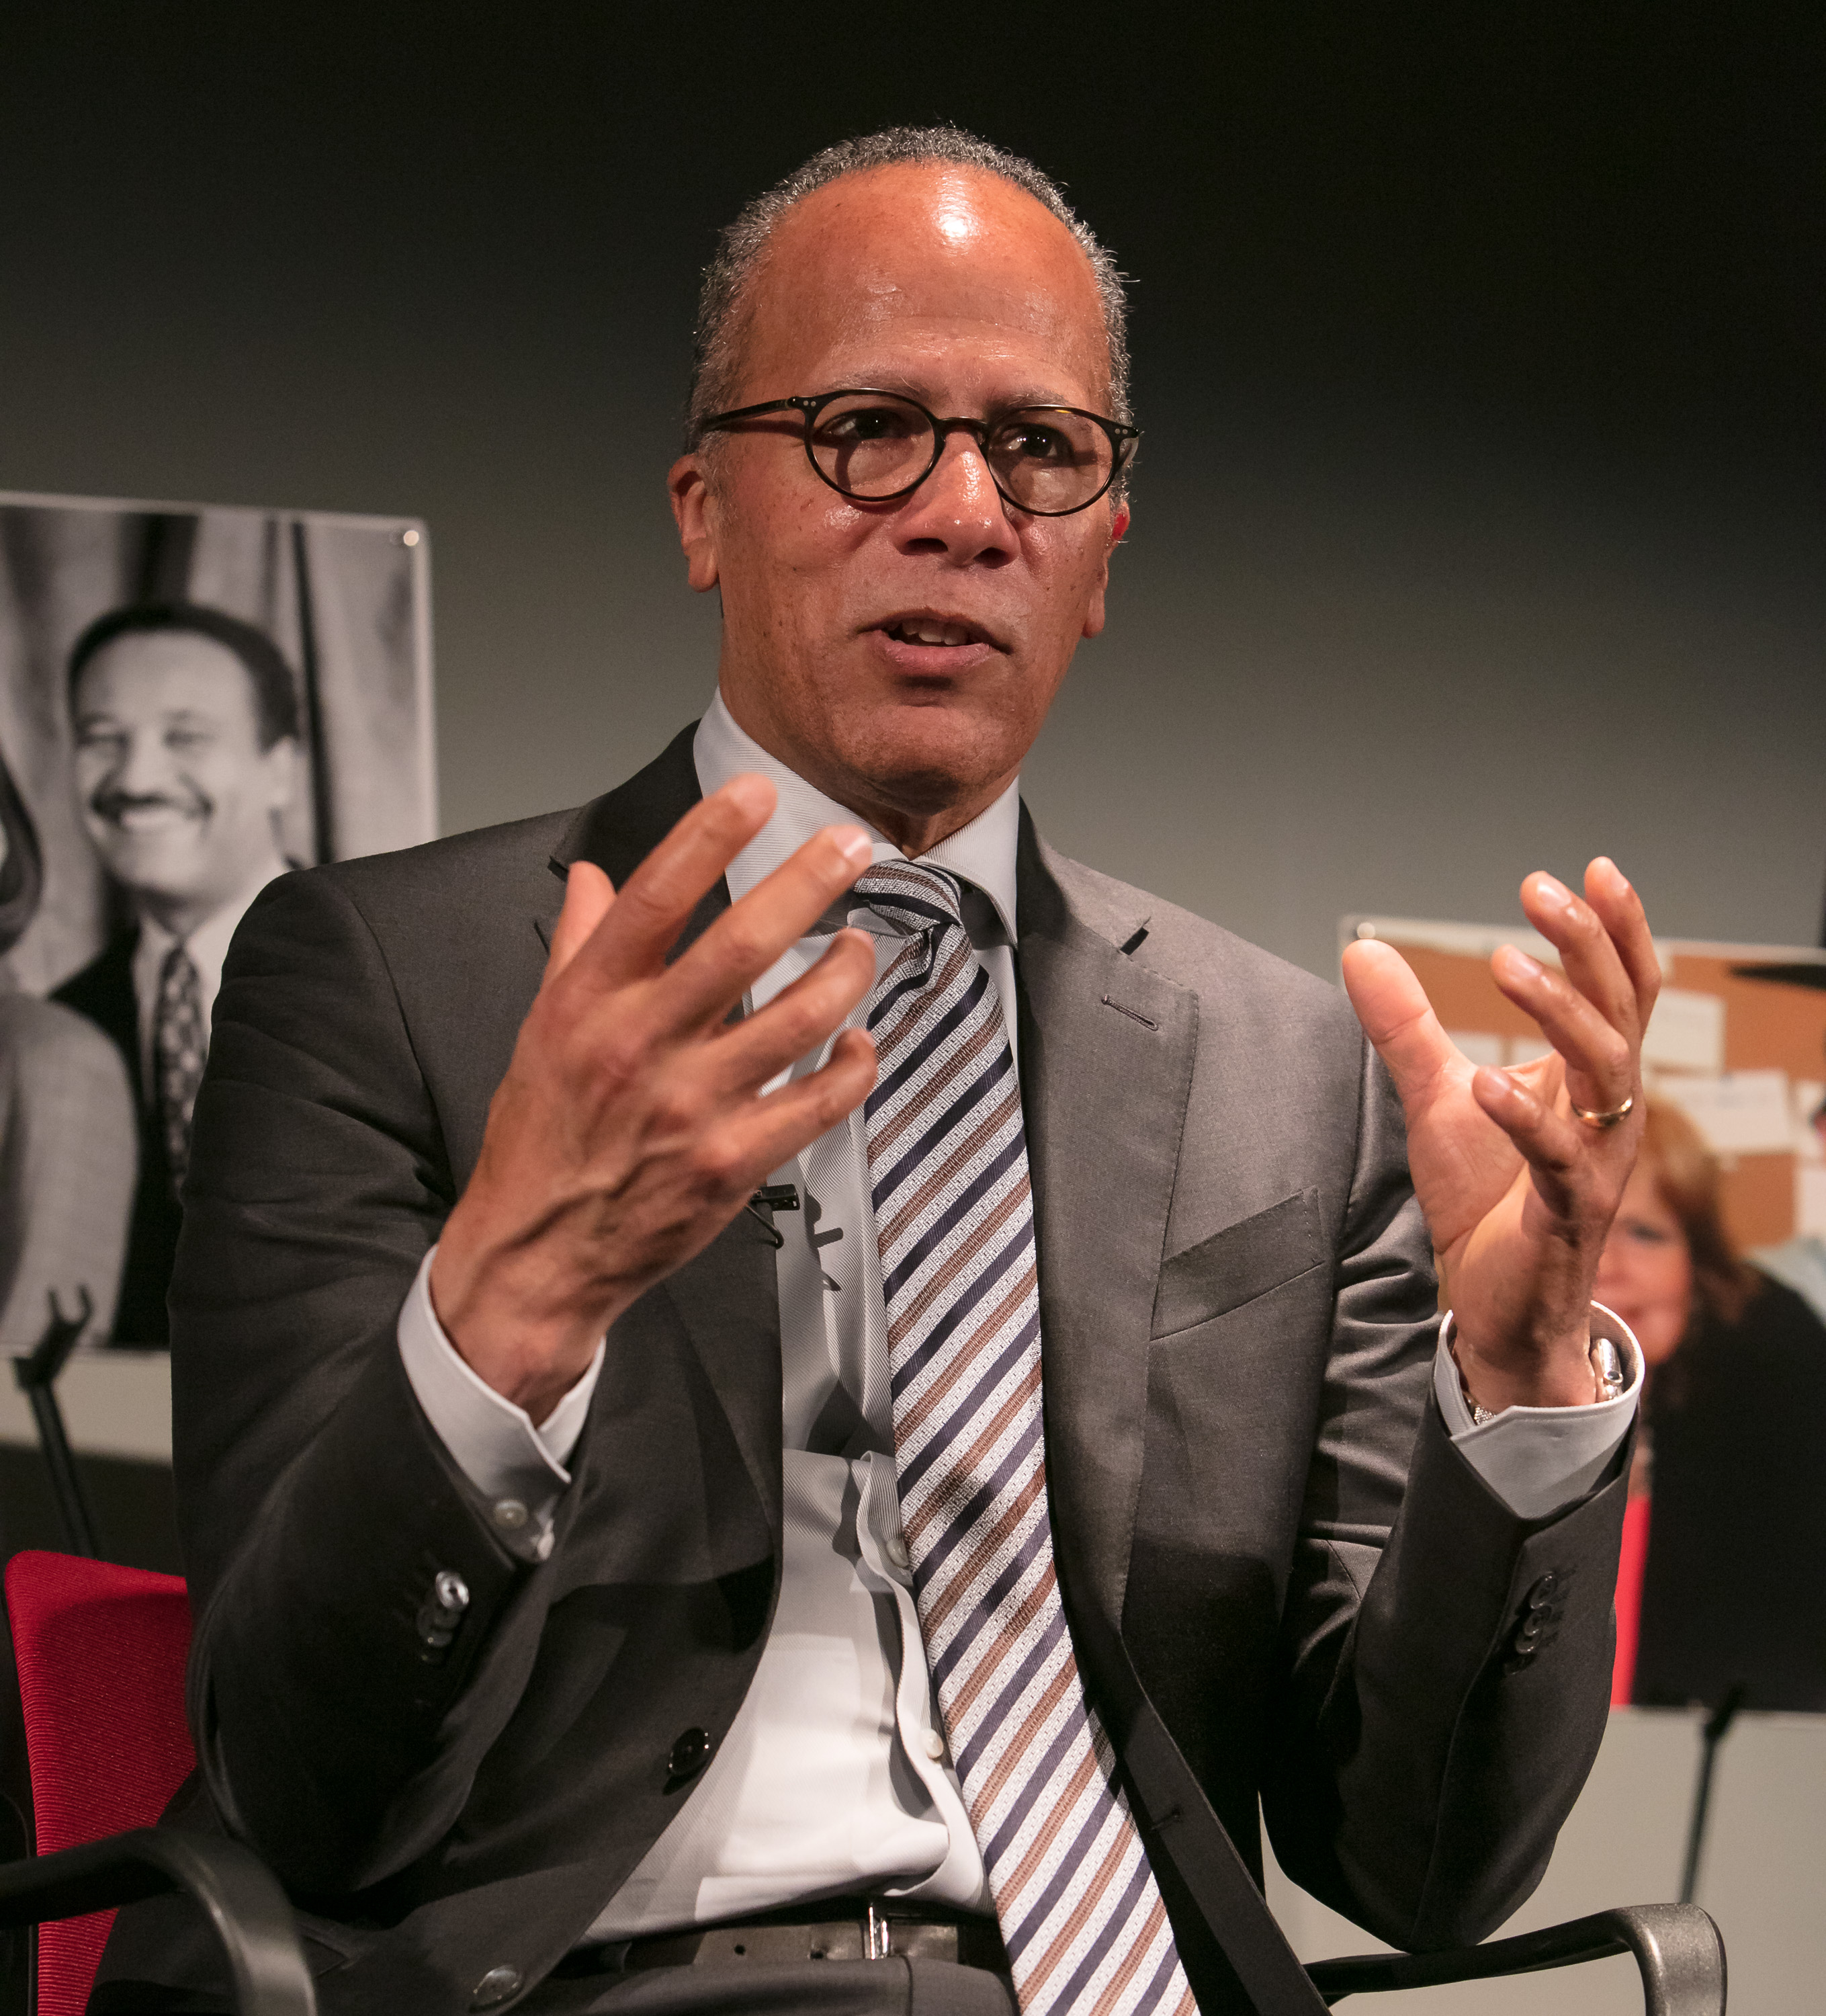 NBC Nightly News's Lester Holt